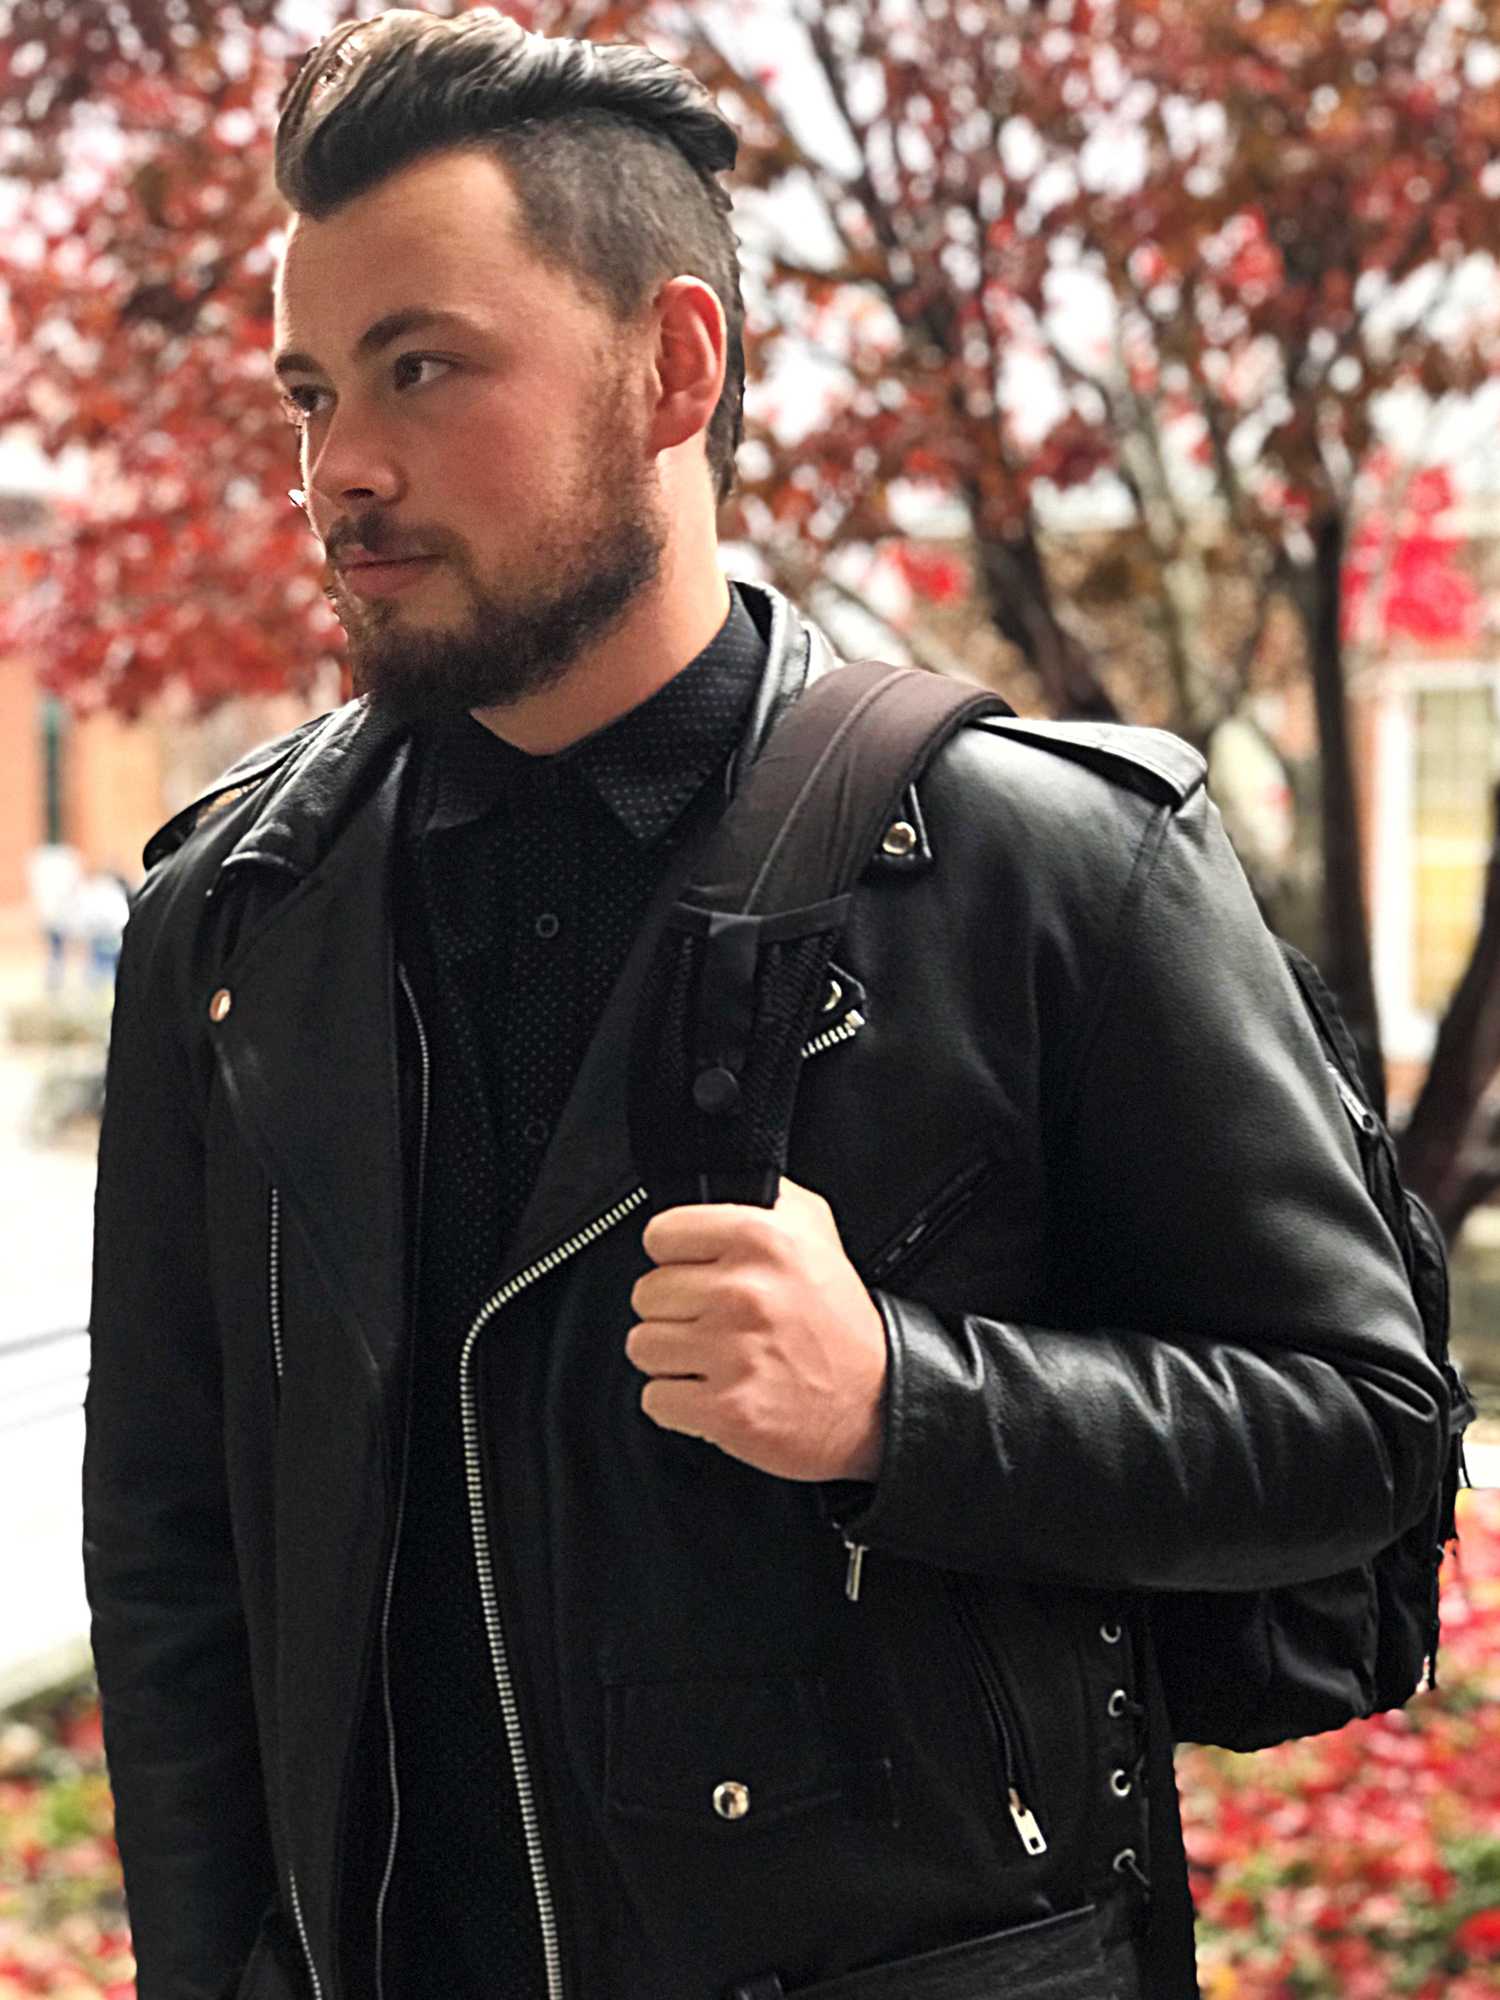 Kevin Bryan, junior marketing major, aligns his style with some of his favorite artists. Raised around the punk music scene, his personal aesthetic mimics those of artists.